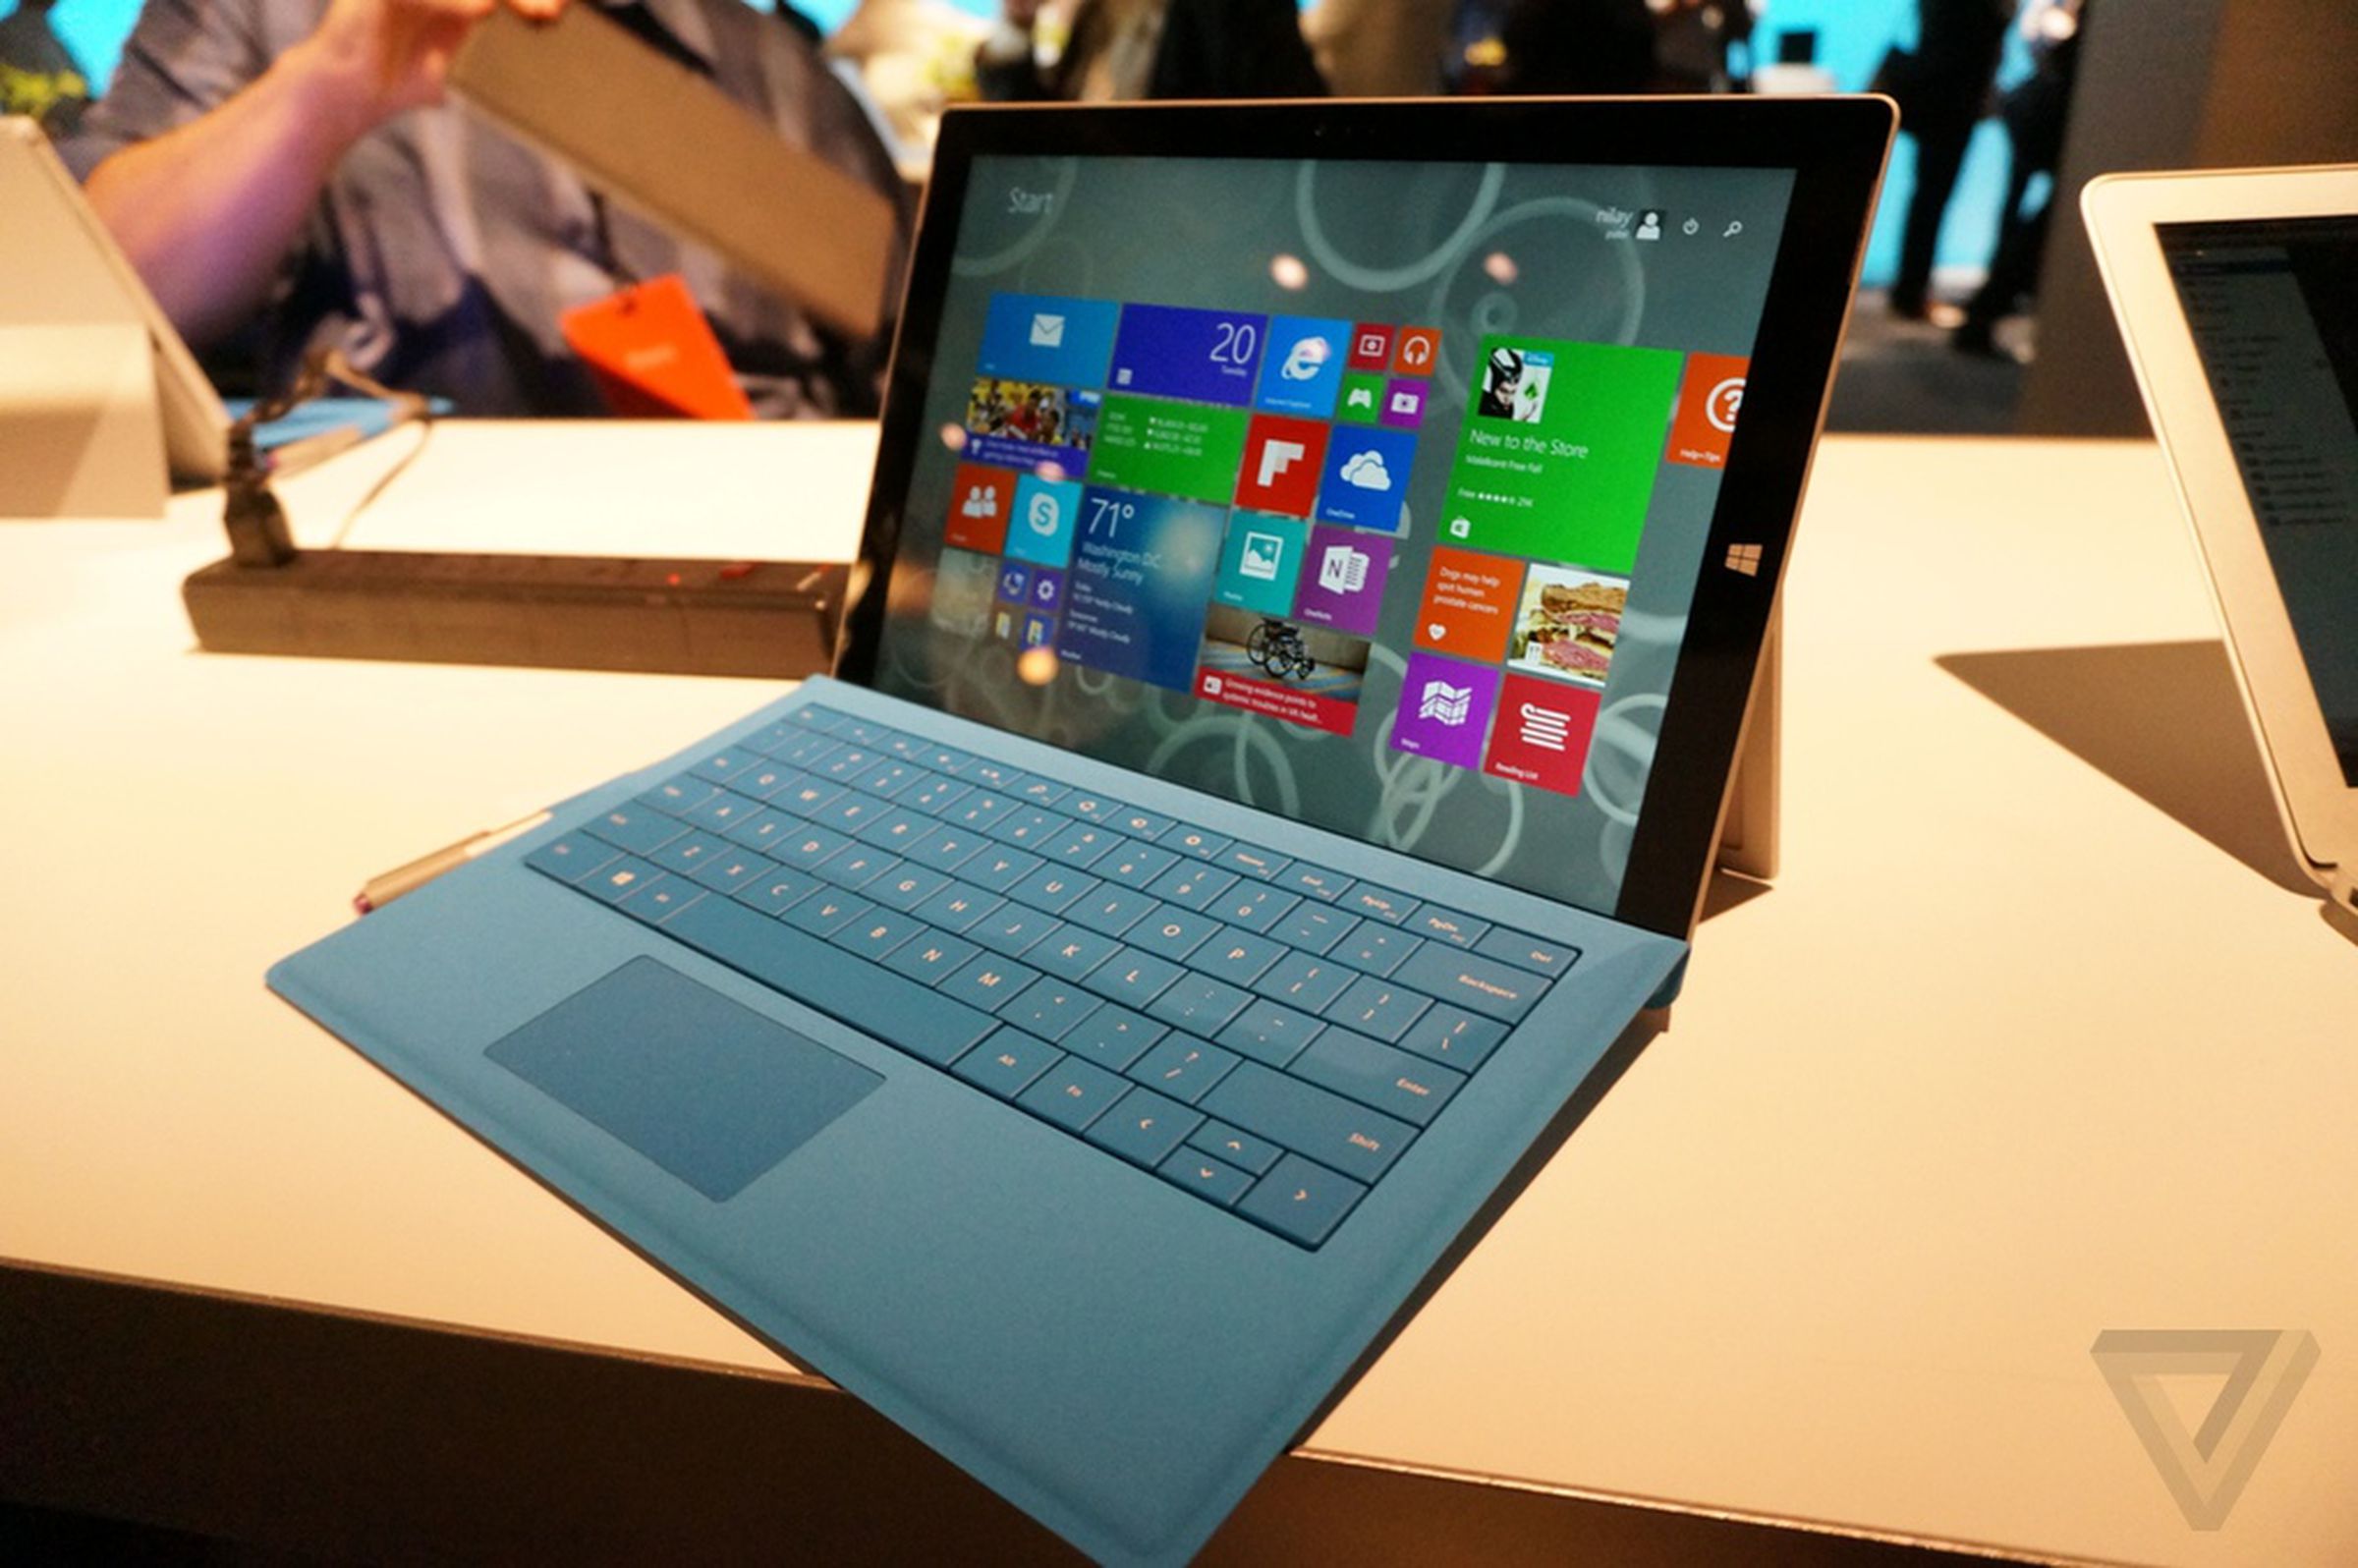 Surface Pro 3 hands-on photos